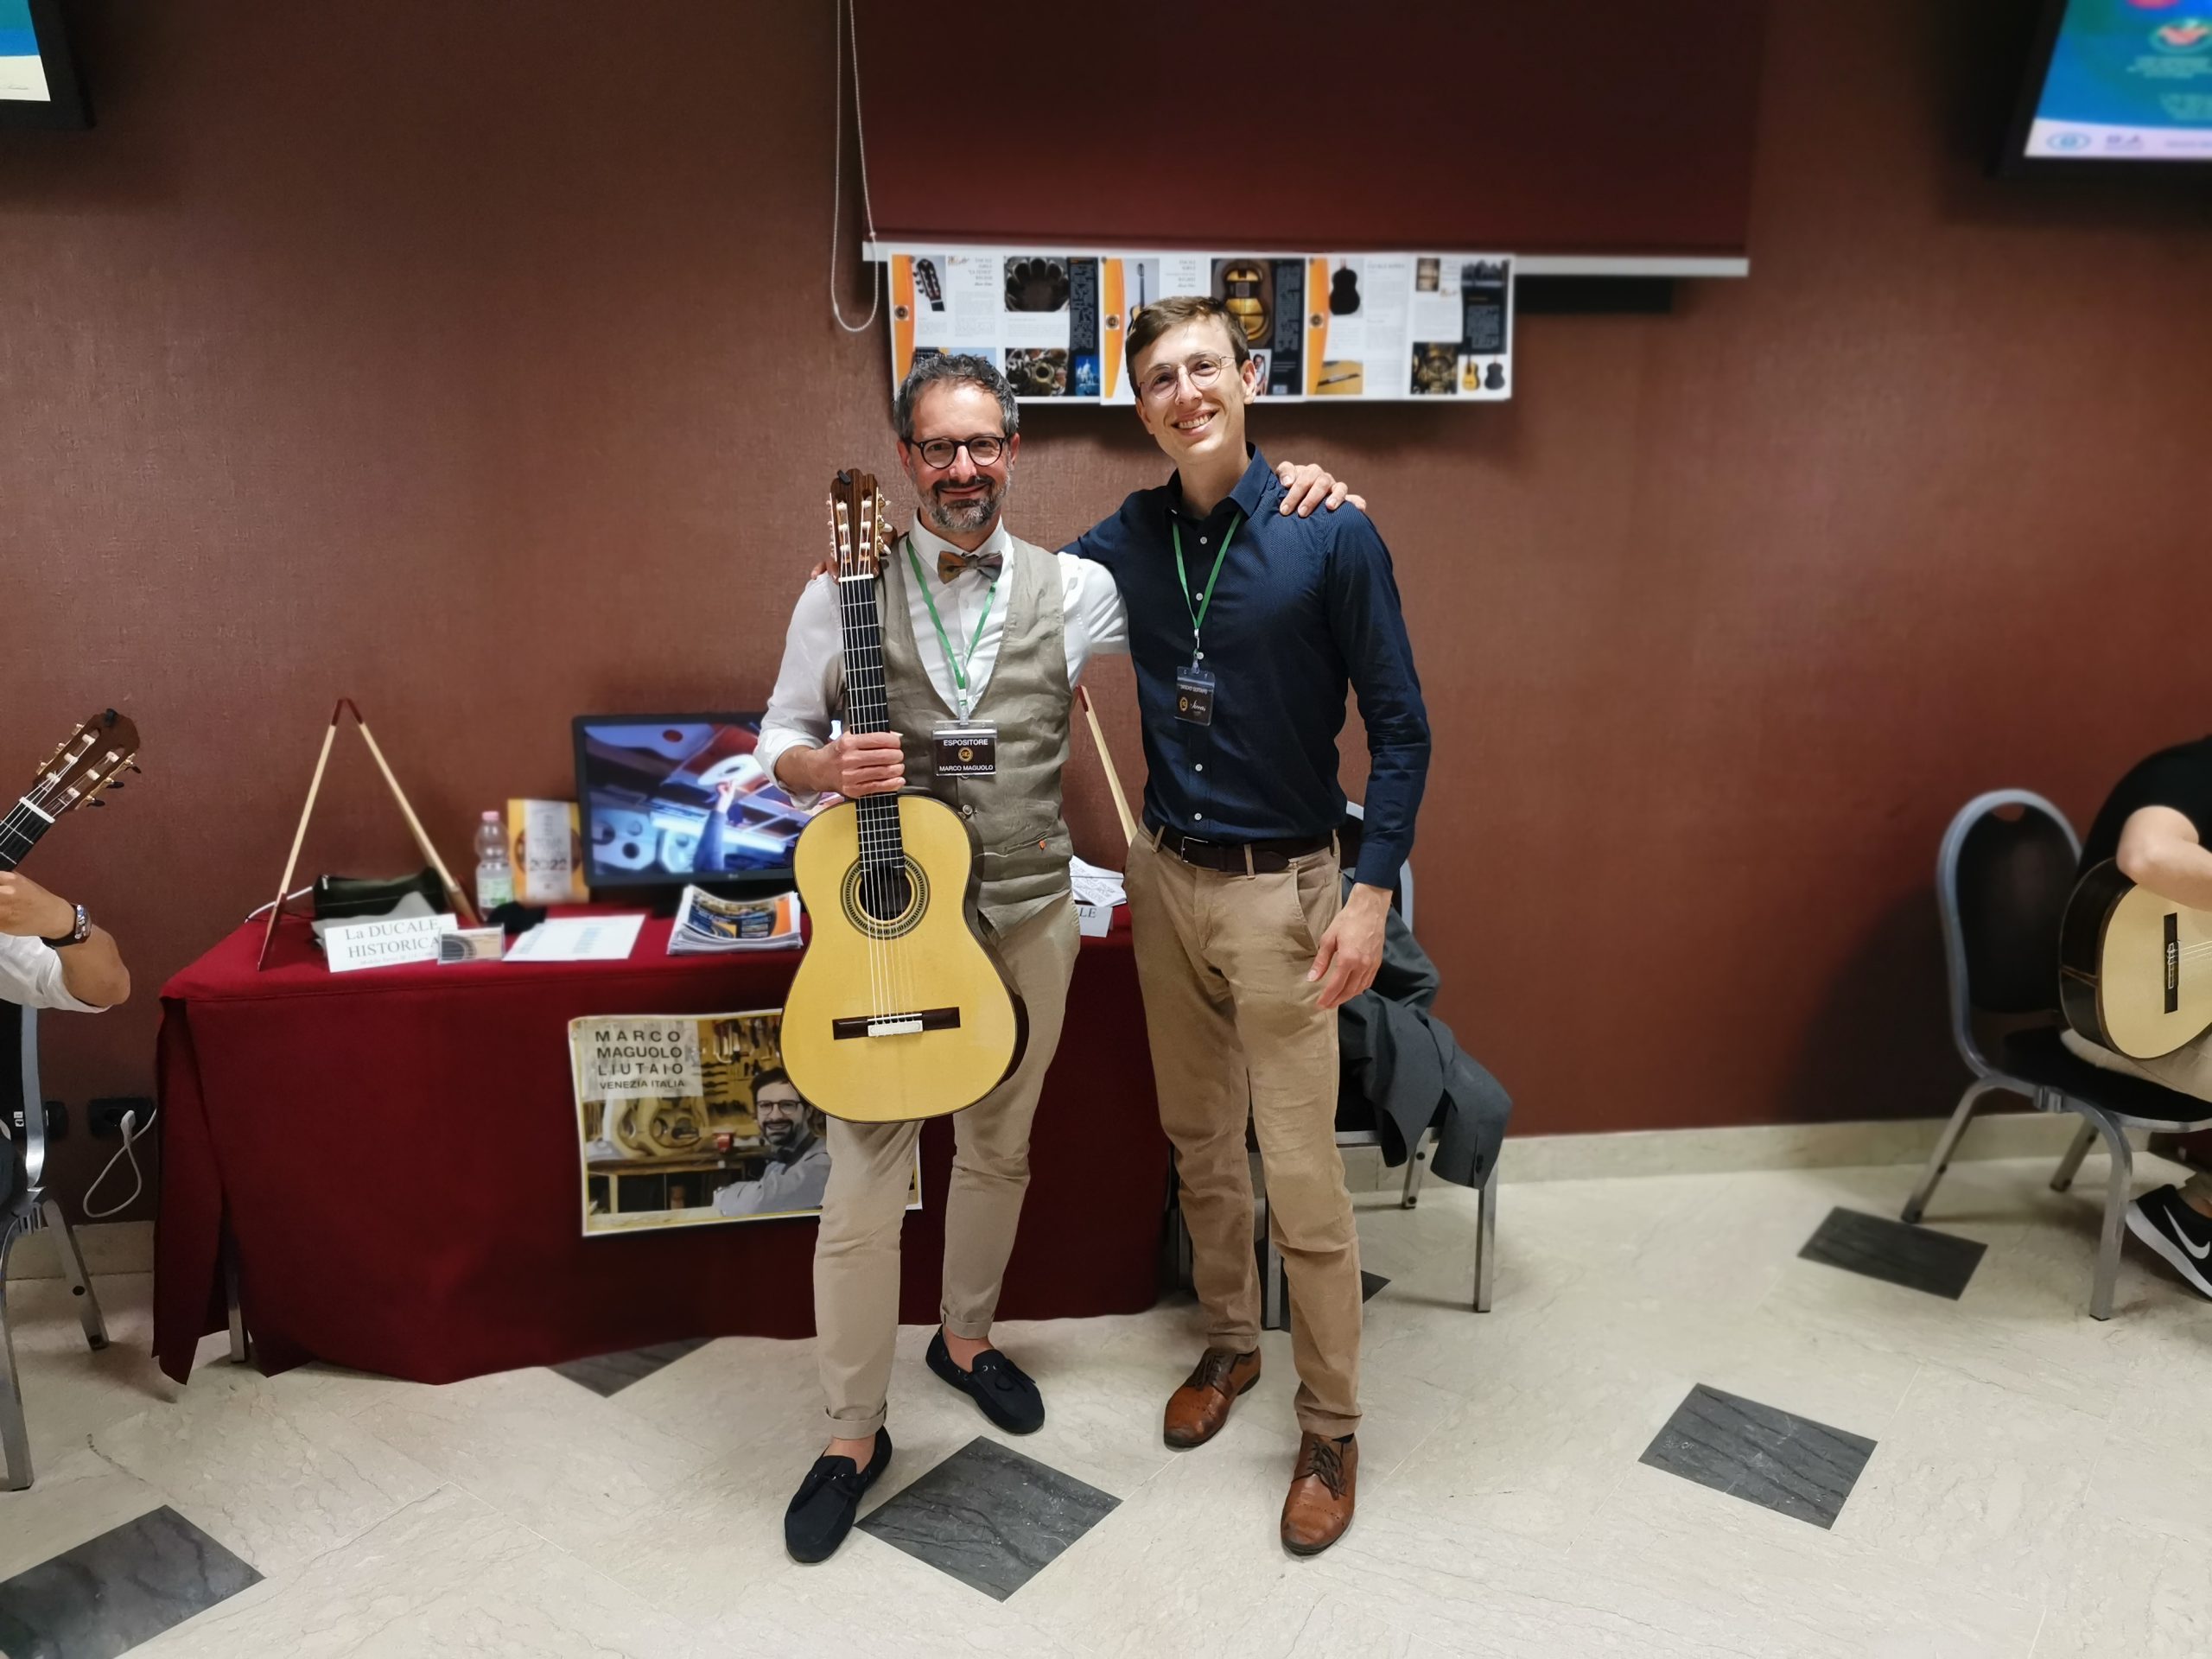 With Marco Maguolo and his REG special edition La Ducale Historica which will be at Siccas Guitars soon scaled